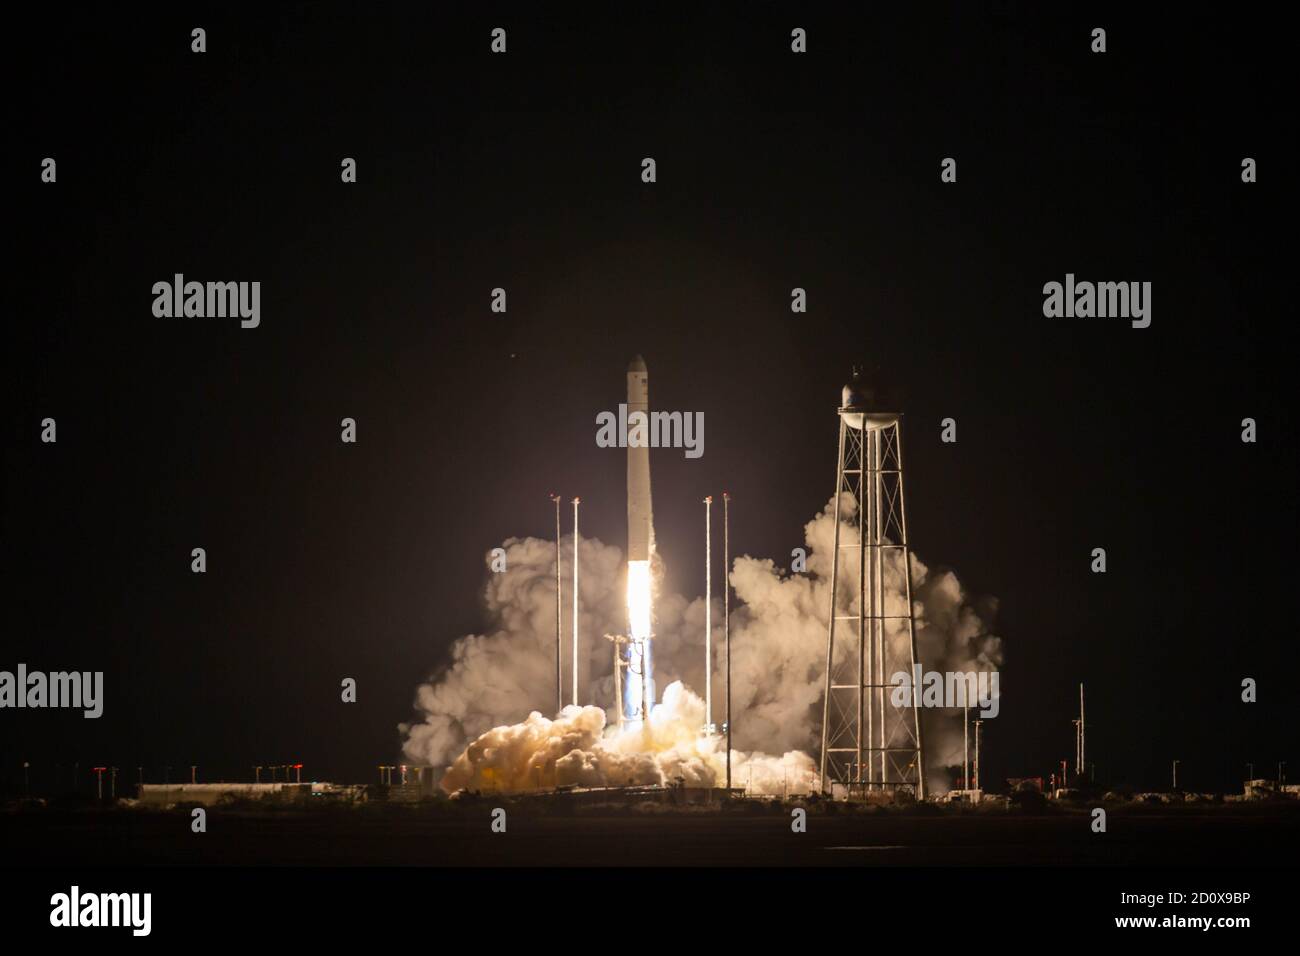 The Northrop Grumman Antares rocket, with Cygnus resupply spacecraft onboard, lifts off from the Mid-Atlantic Regional Spaceport at the NASA Wallops Flight Facility October 1, 2020 in Wallops, Virginia. The commercial cargo resupply mission is carrying 8,000 pounds of supplies and equipment to the International Space Station. Stock Photo